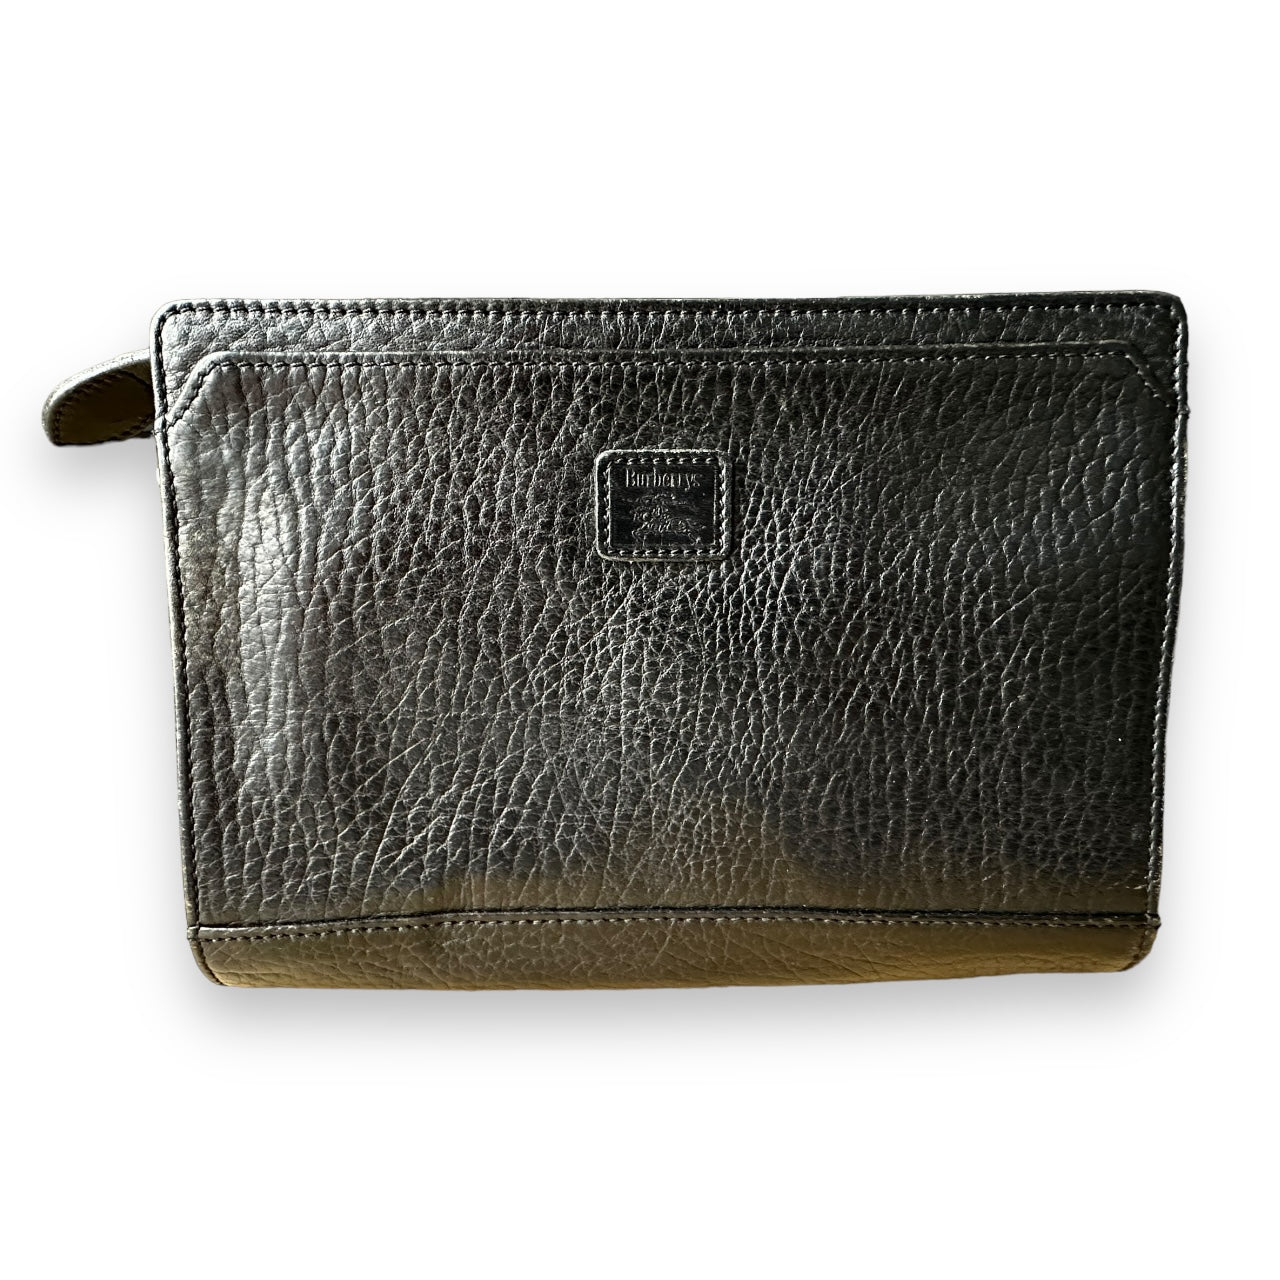 Burberry Vintage Leather Clutch